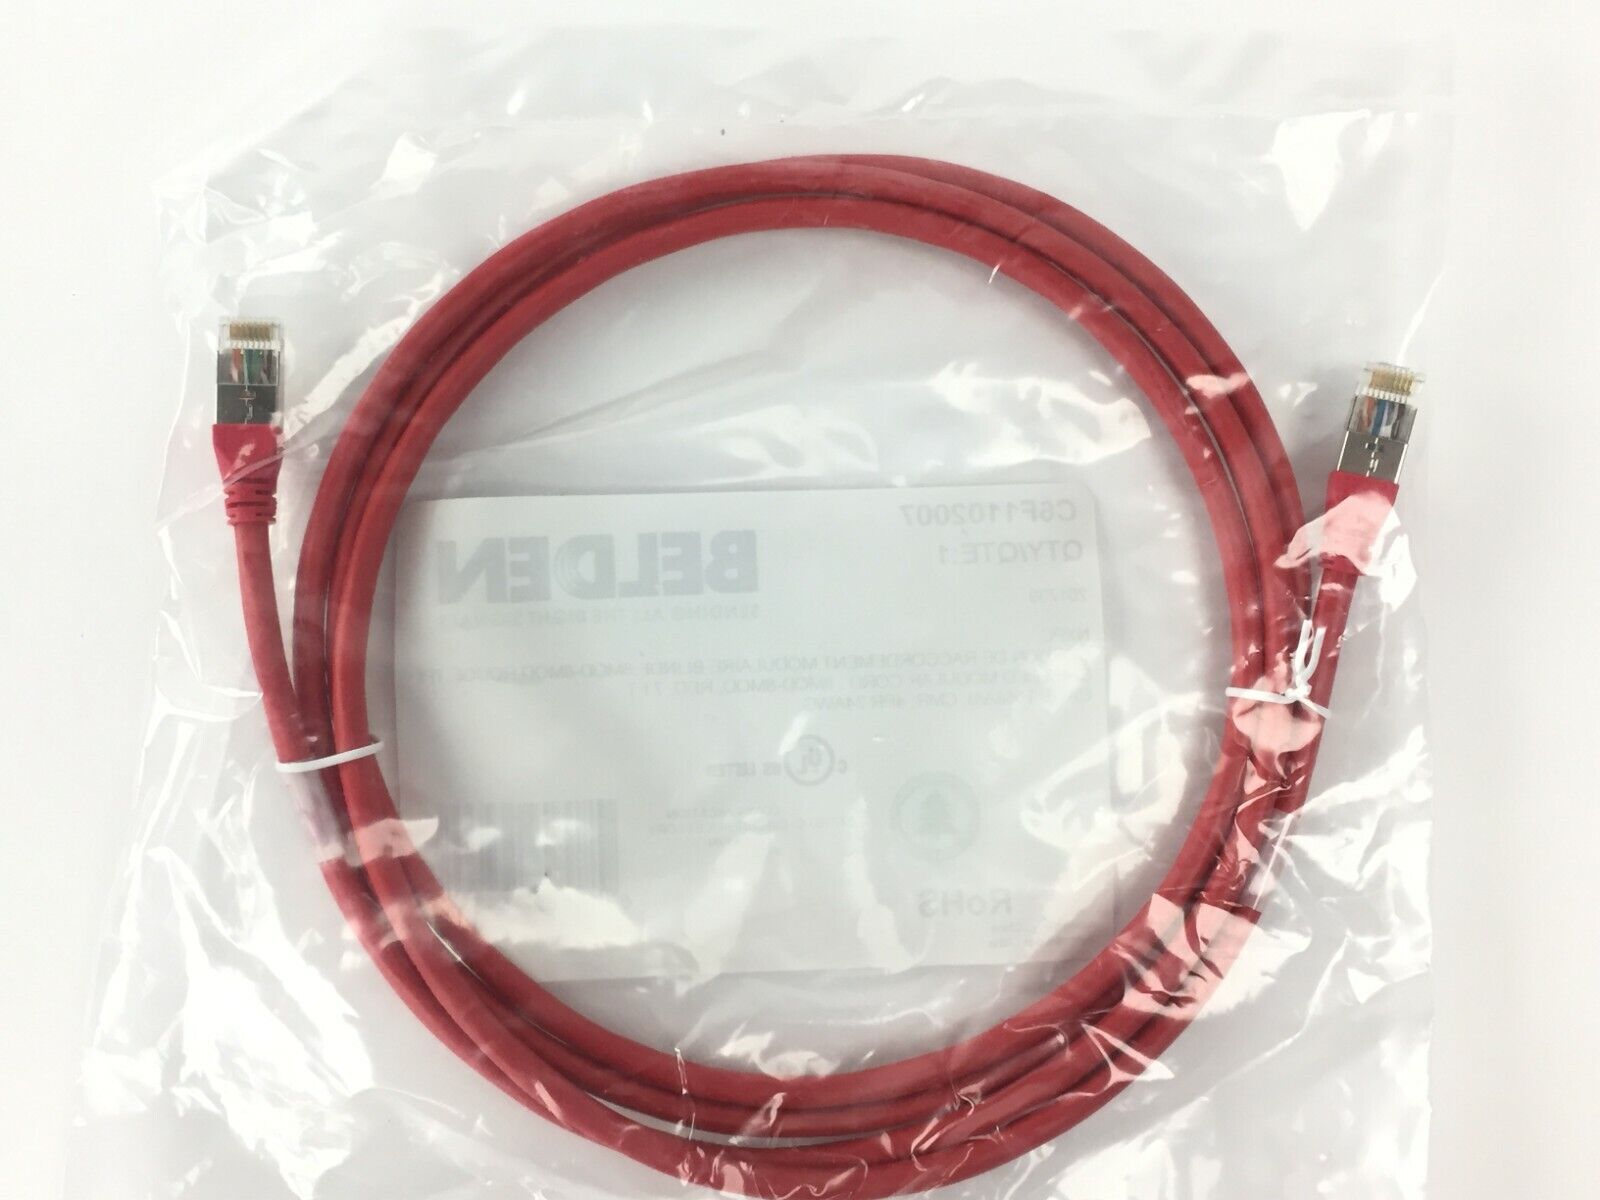 Belden C6F1102007 CAT6 Ethernet Patch Networking Cable 201739 Cord, RED, 7-Foot